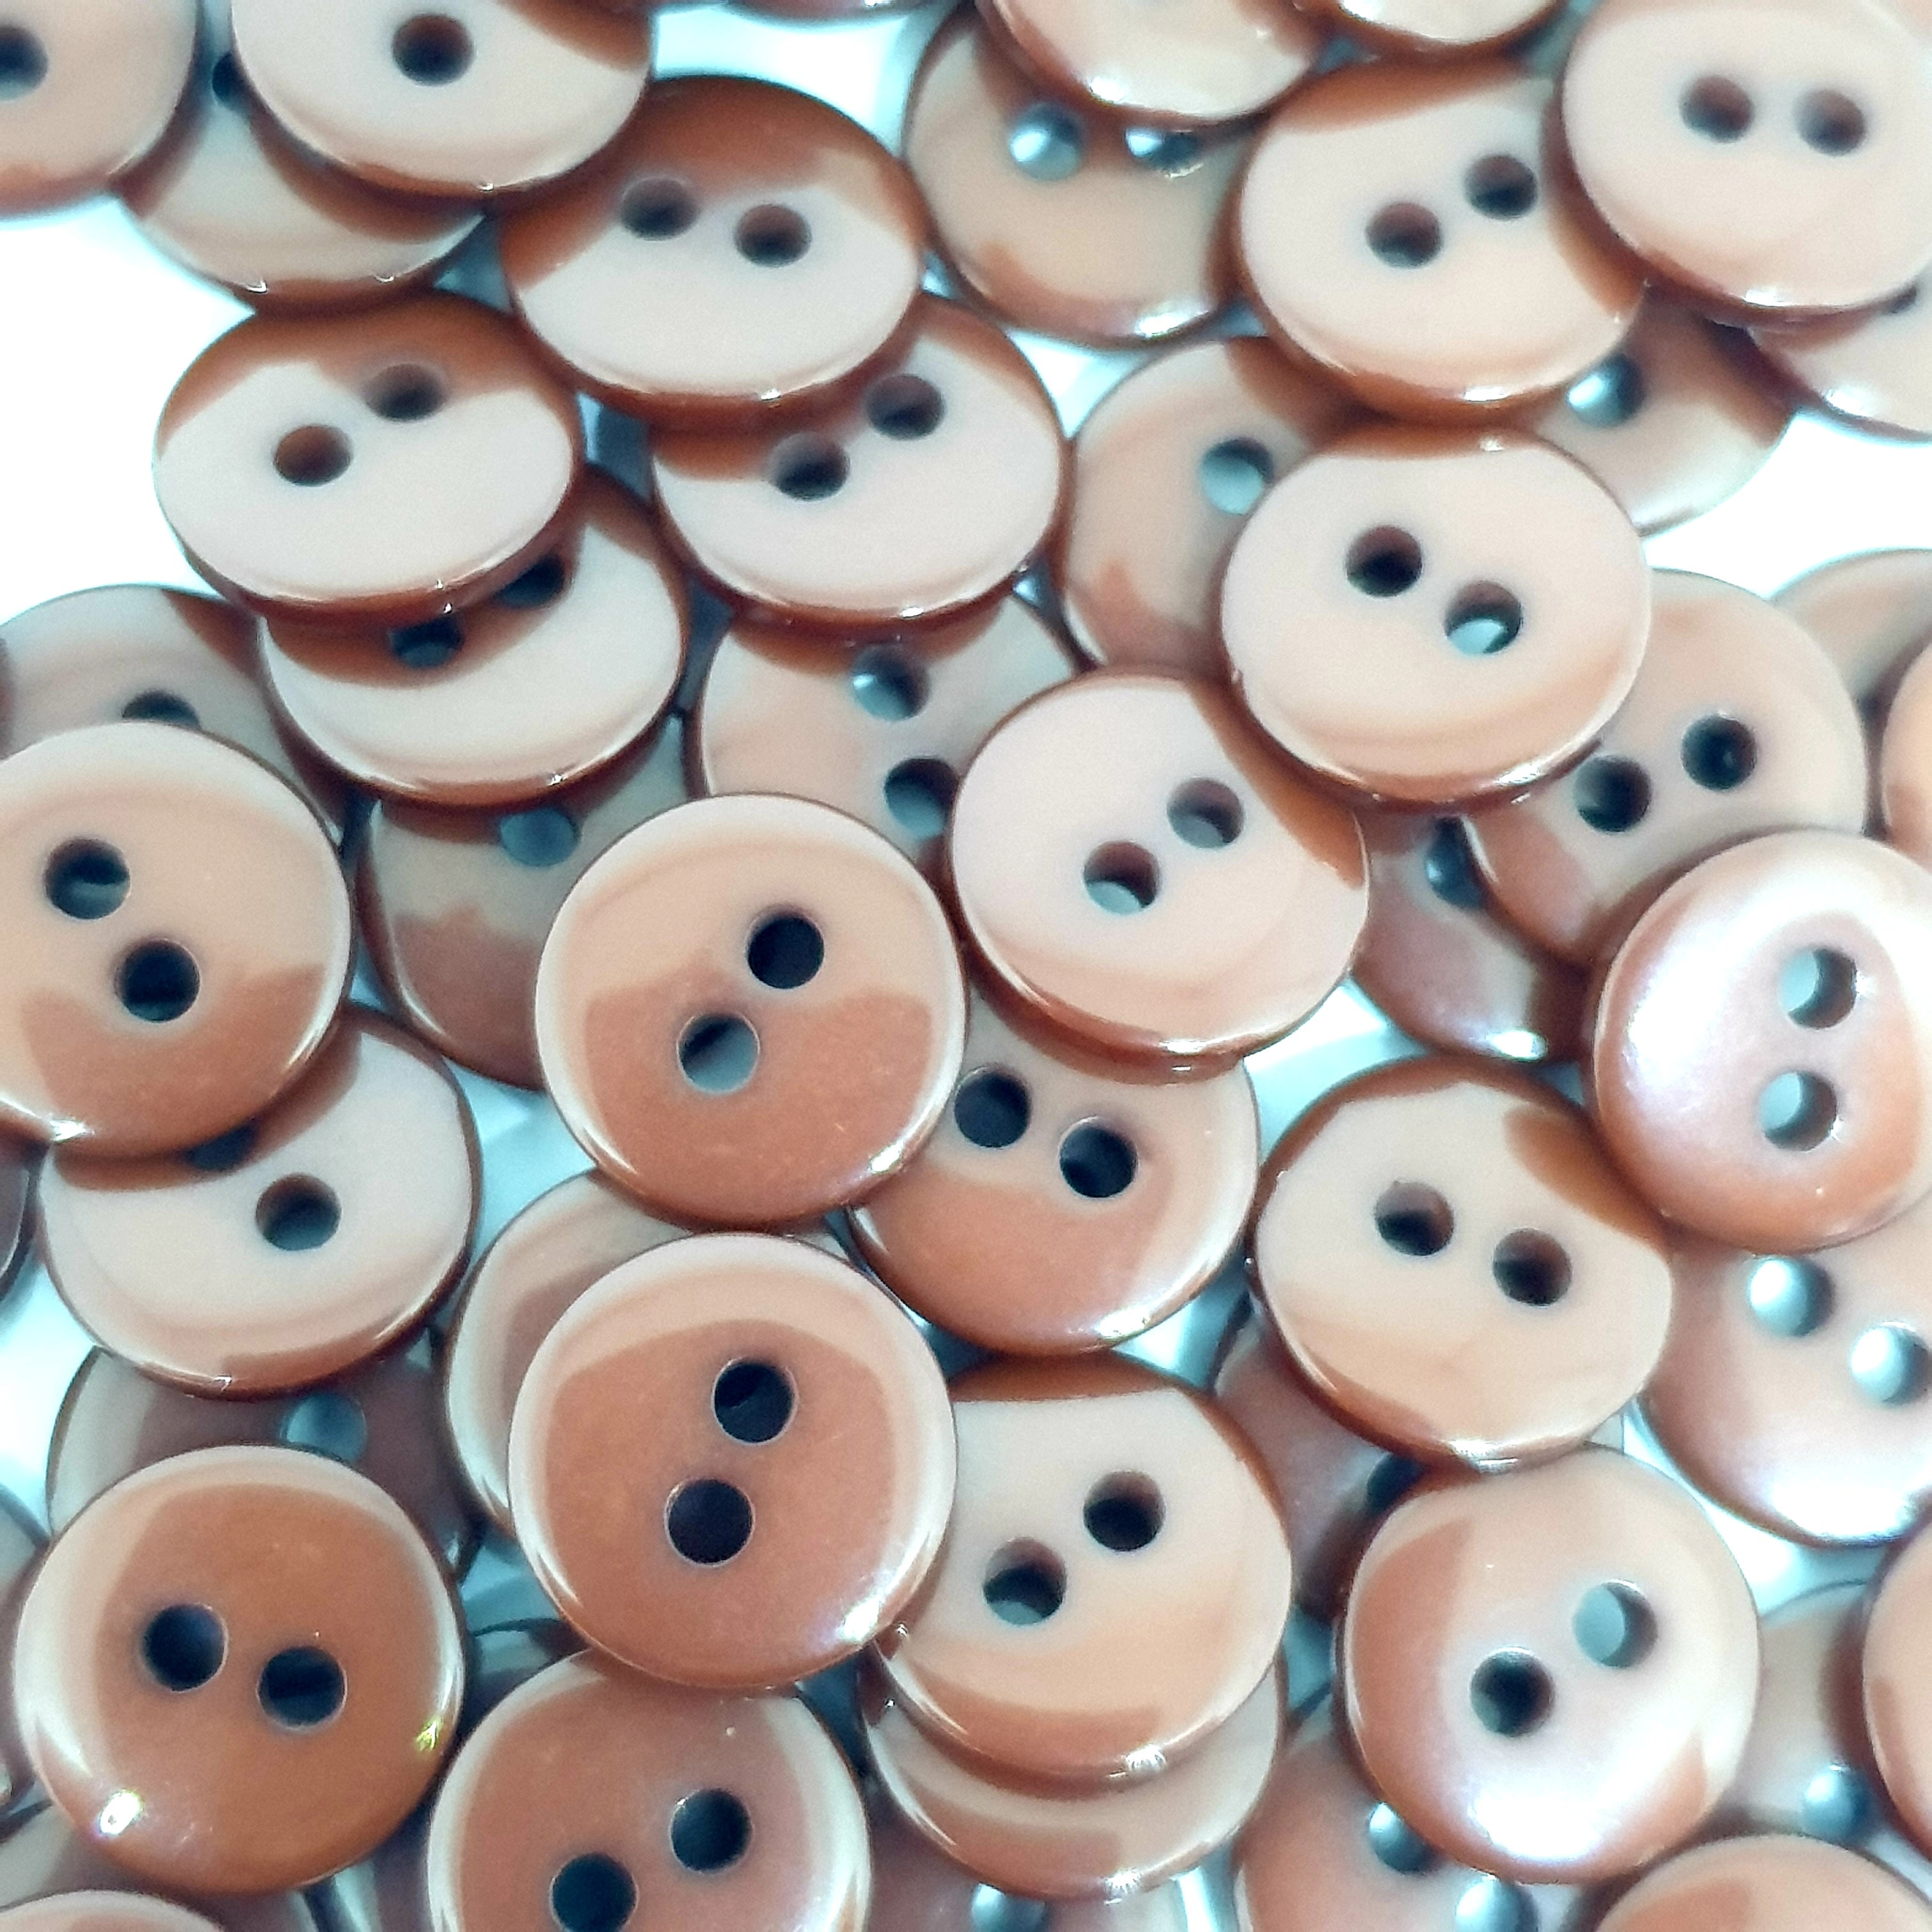 MajorCrafts 120pcs 10mm Dark Brown 2 Holes Small Round Resin Sewing Buttons B25